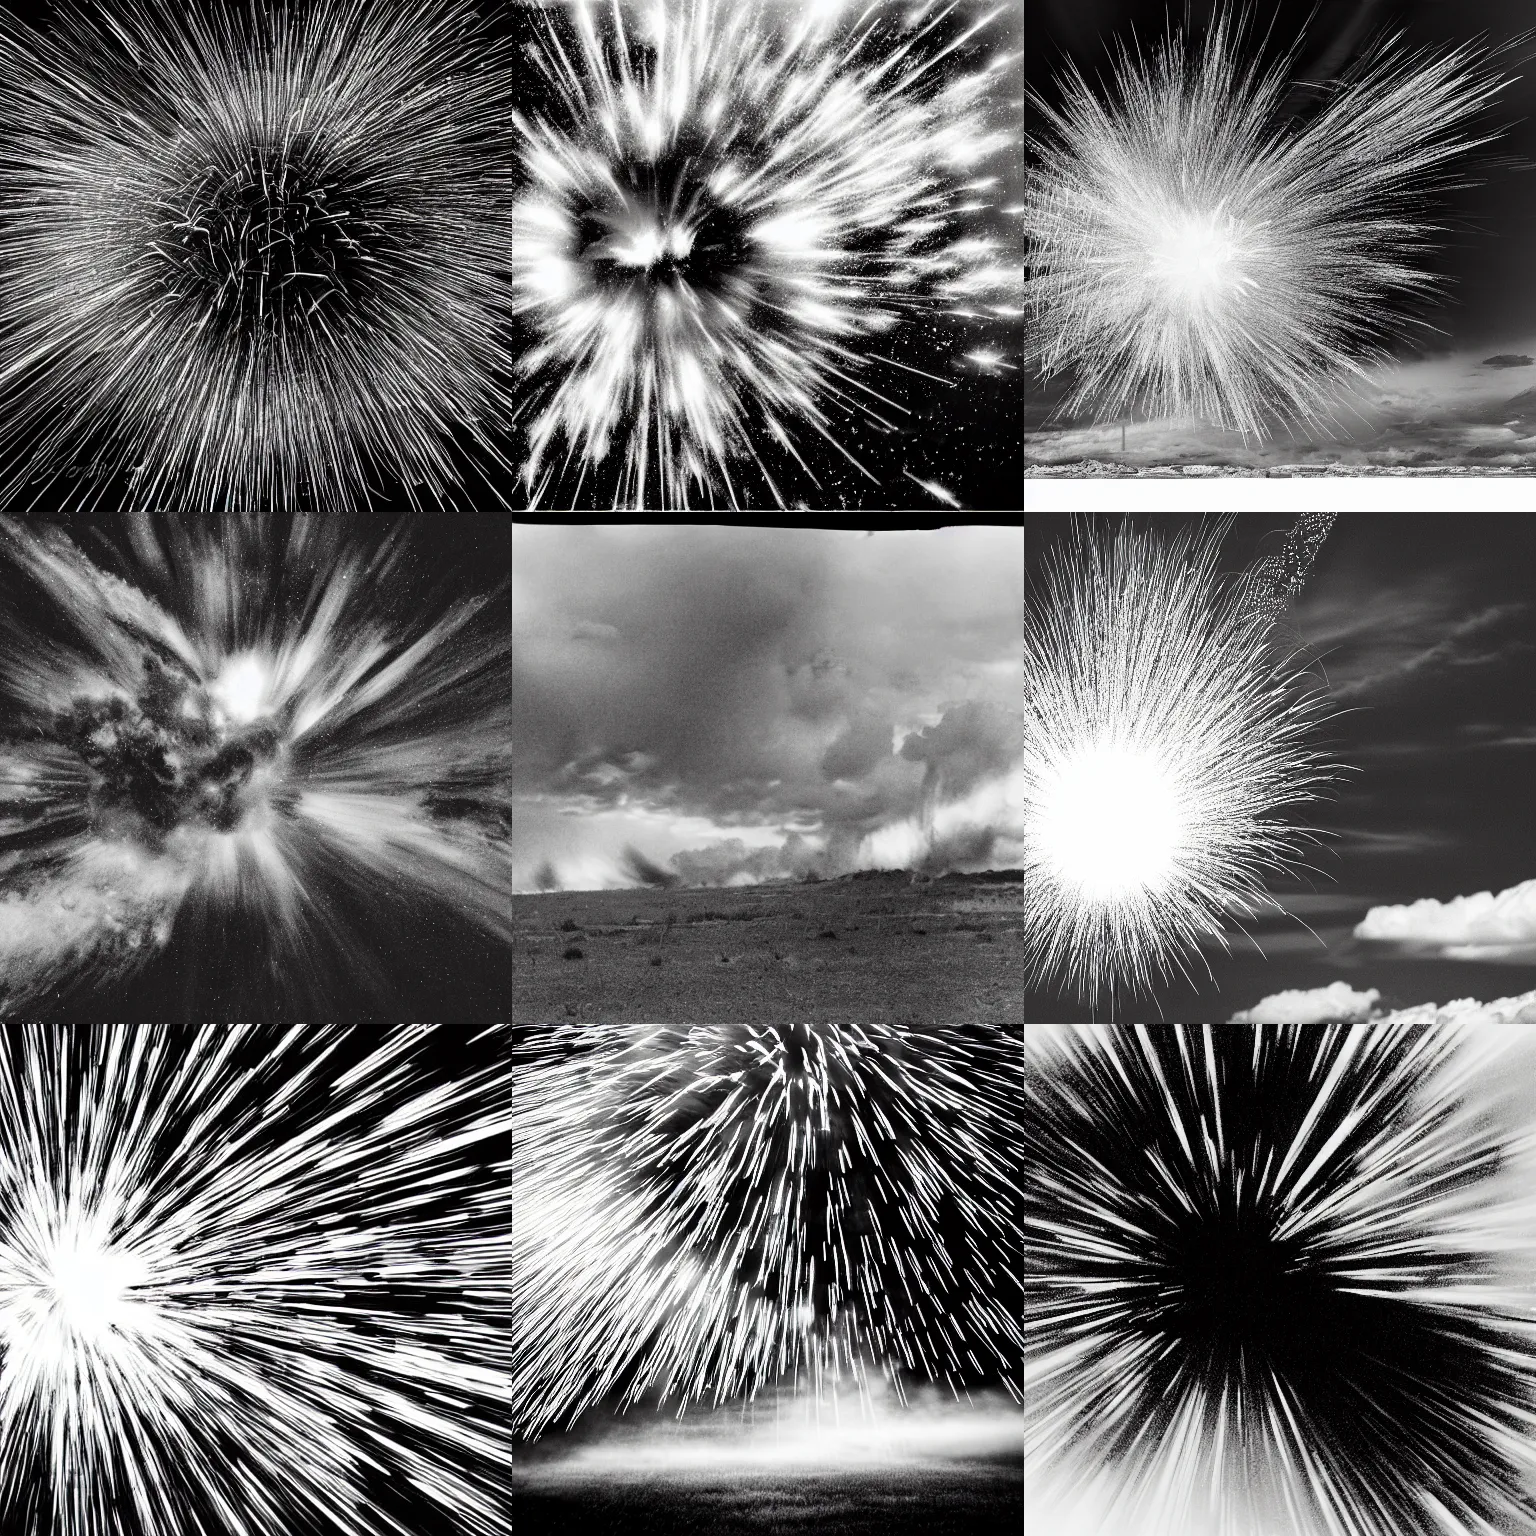 Prompt: A black and white photograph depicting an explosion of colors